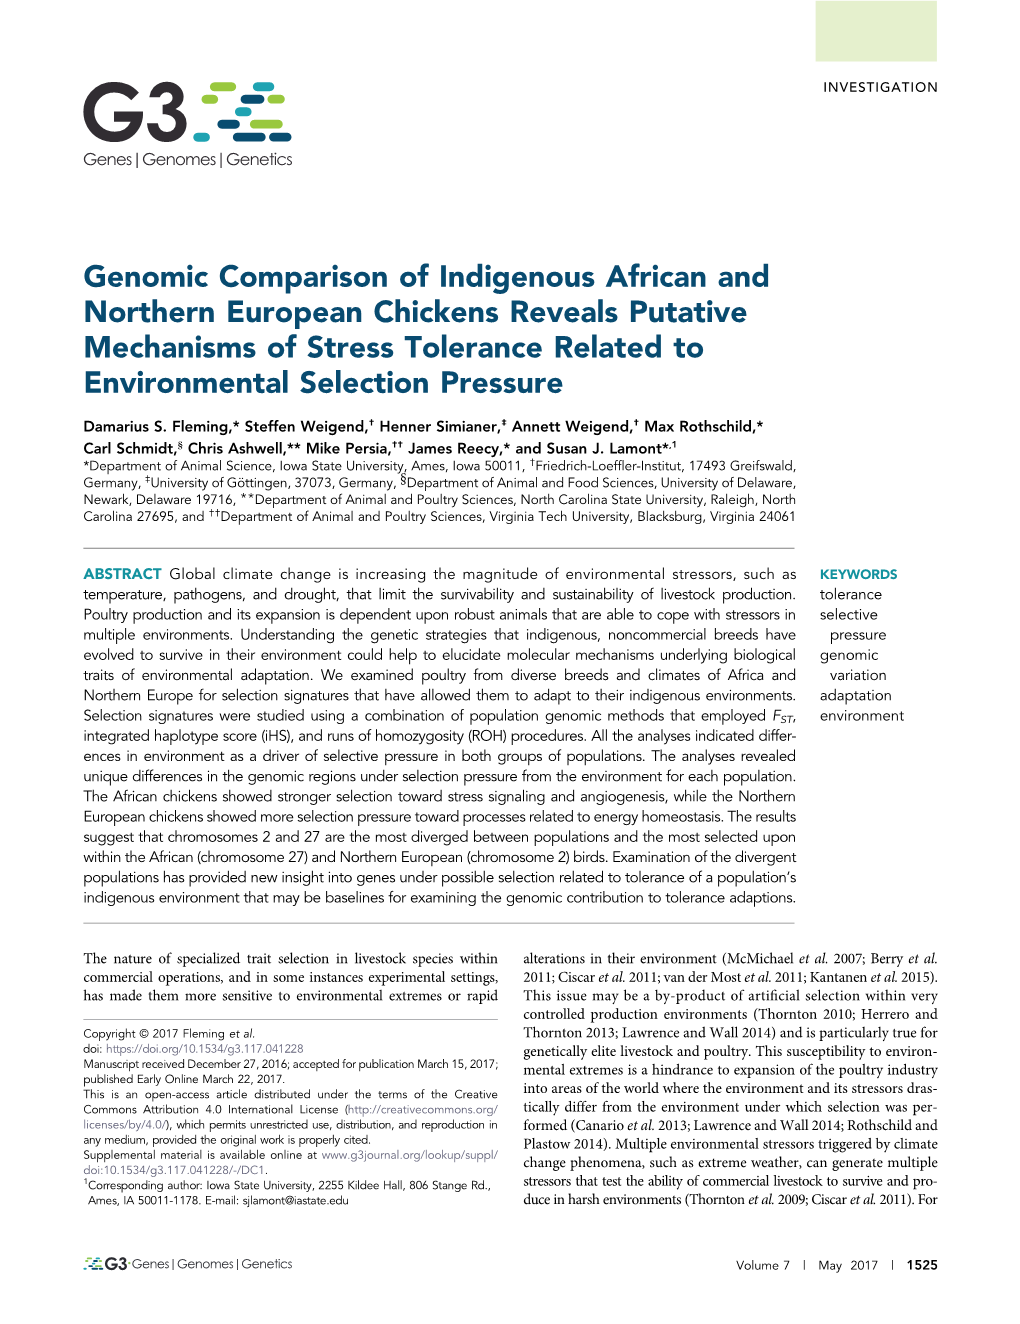 Genomic Comparison of Indigenous African and Northern European Chickens Reveals Putative Mechanisms of Stress Tolerance Related to Environmental Selection Pressure